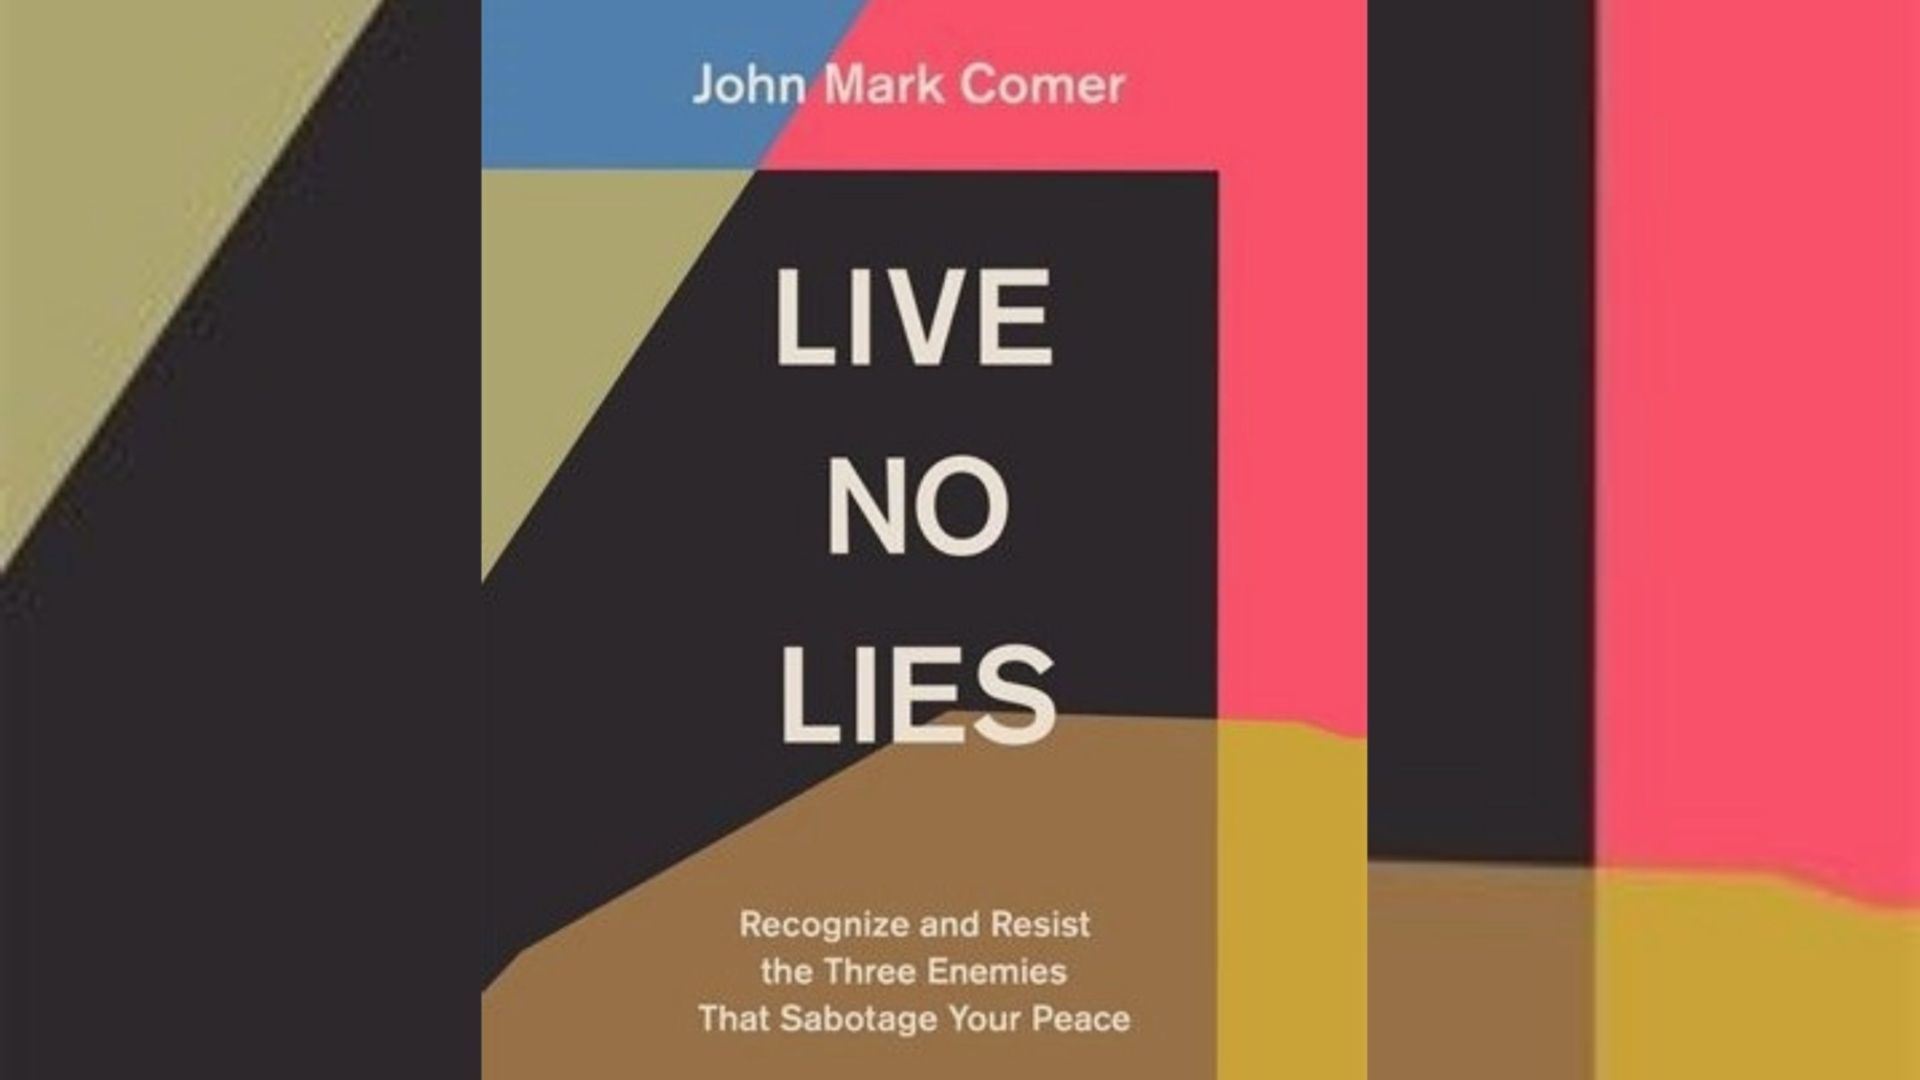 Book review of 'Live No Lies' by John Mark Comer